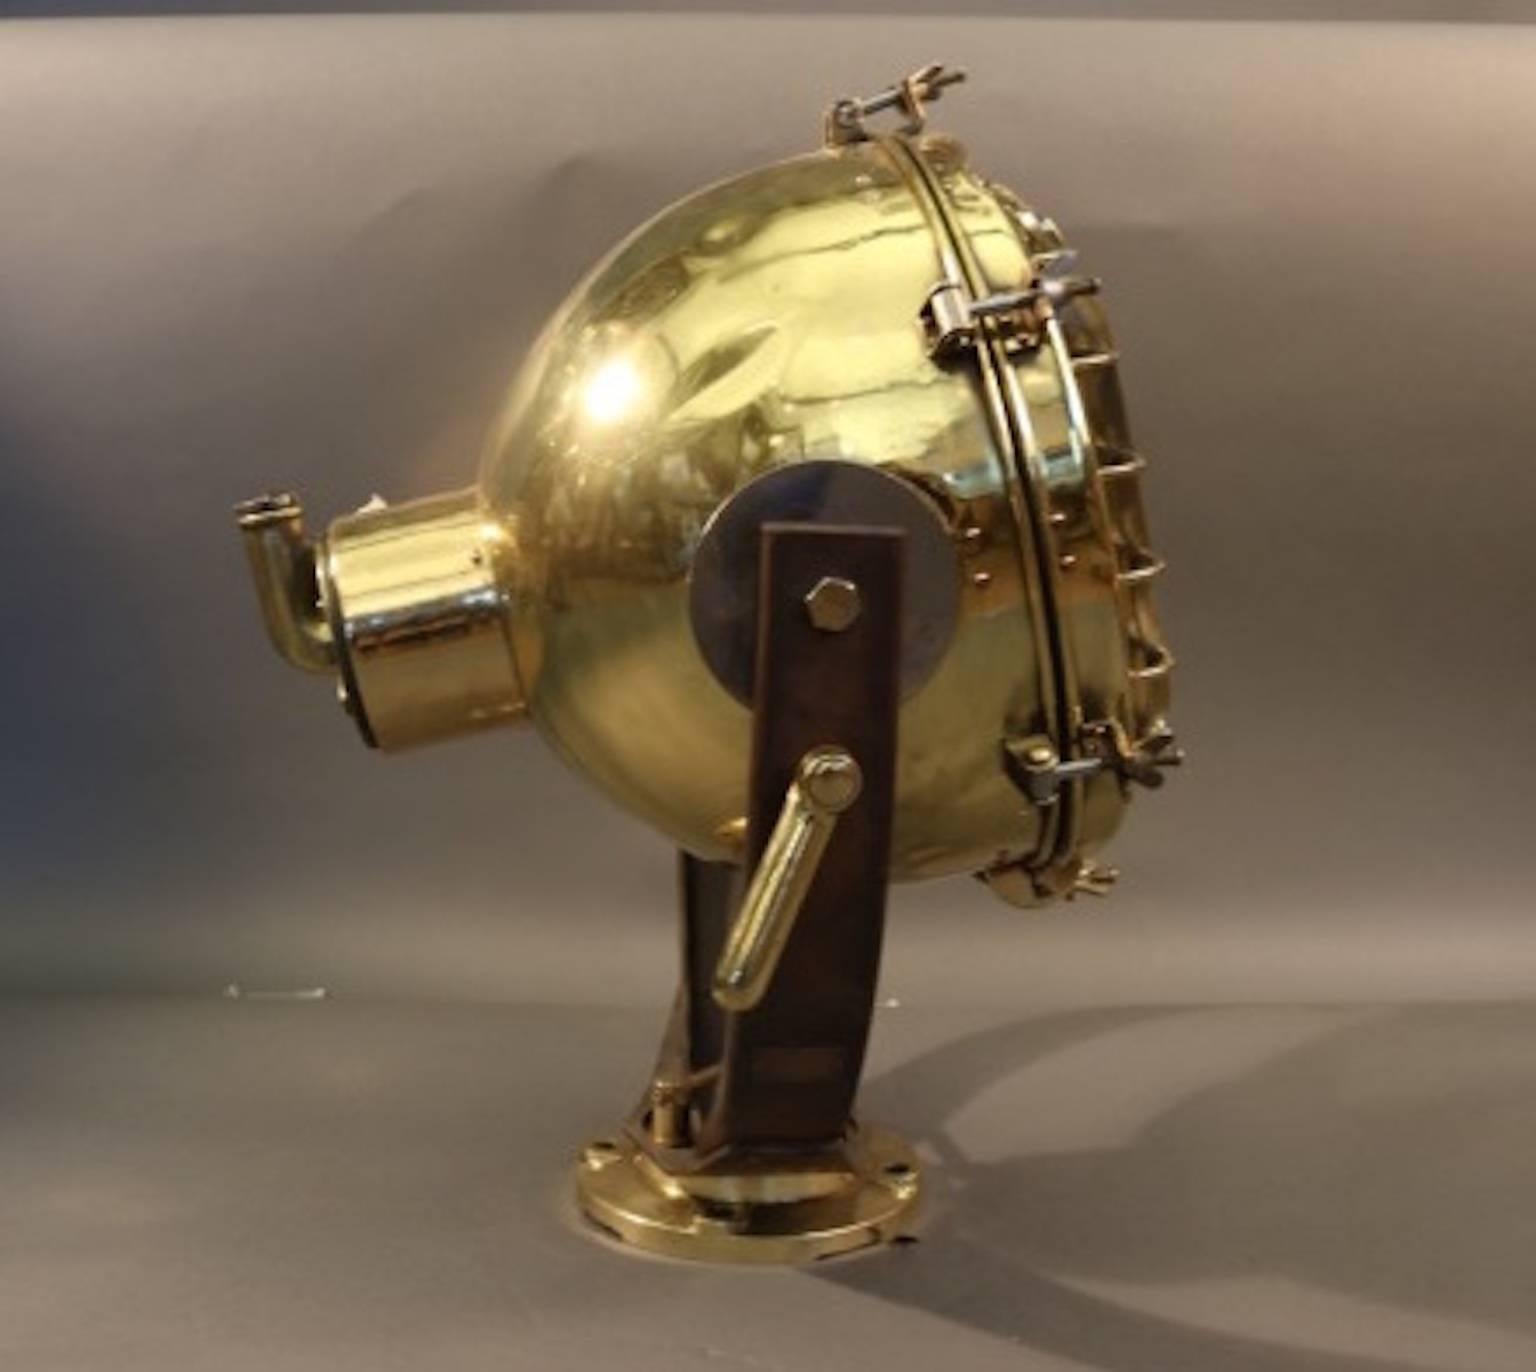 Substantial brass ship's cargo light with glass lens, protective cage, pedestal base, and etc.